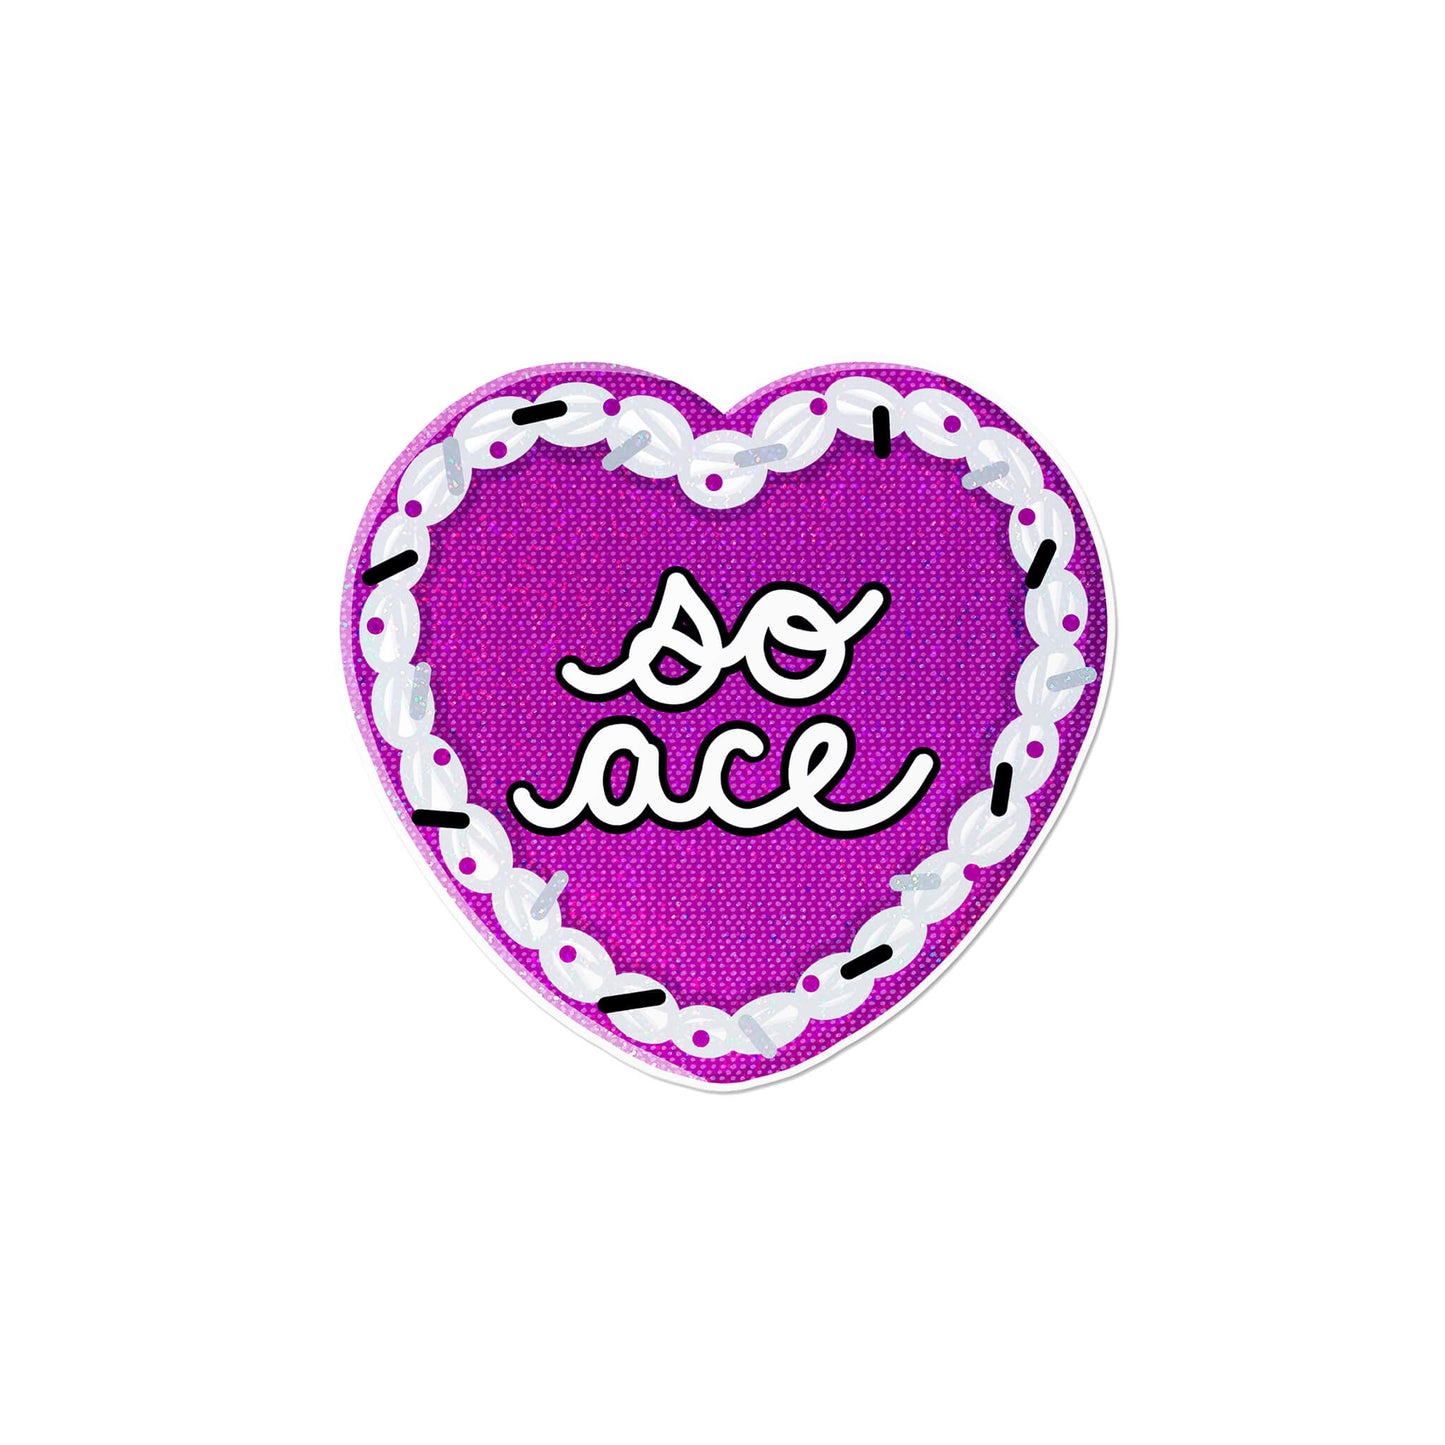 Holographic Asexual Heart Cake Sticker